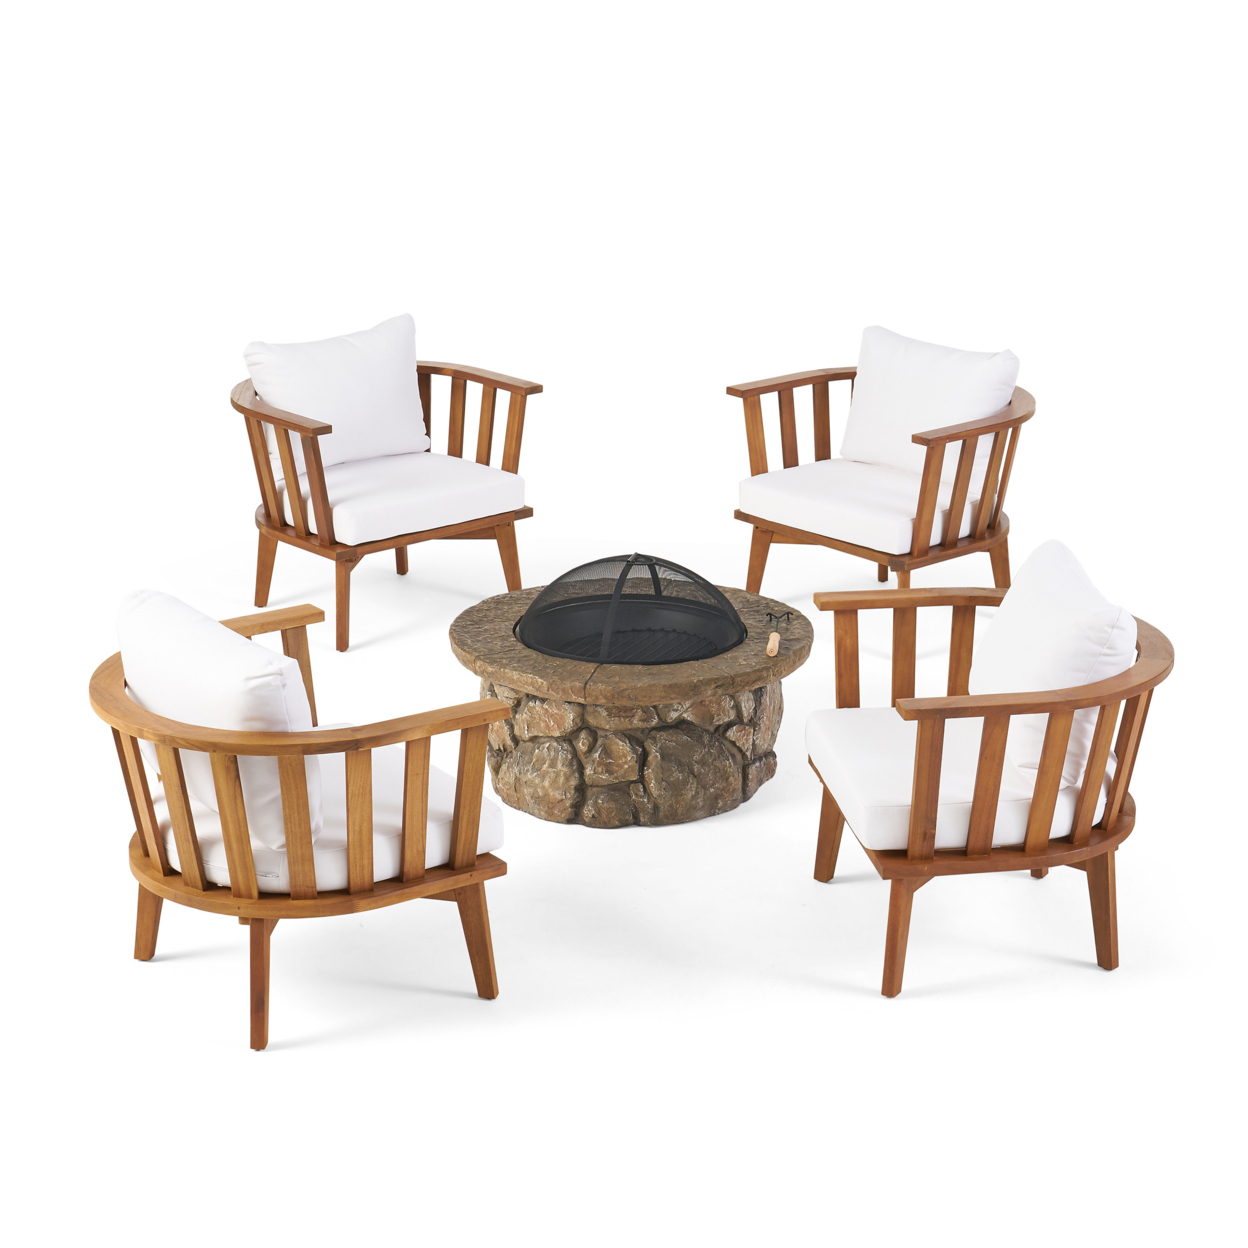 Khalel Outdoor Acacia Wood 4 Seater Club Chairs And Fire Pit Set